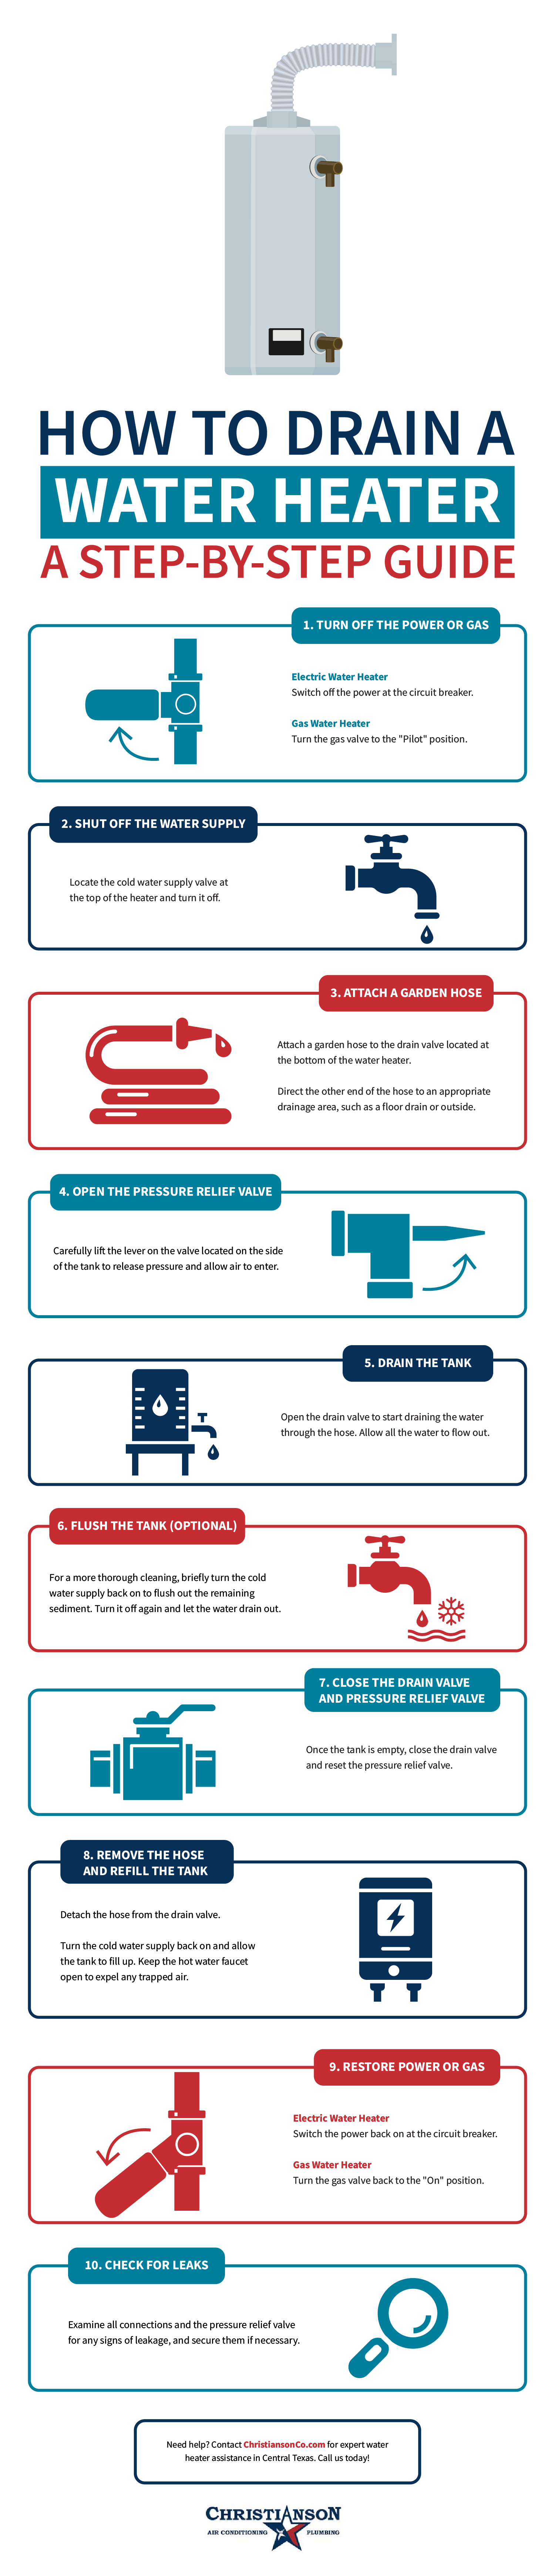 How to Drain a Water Heater Infographic